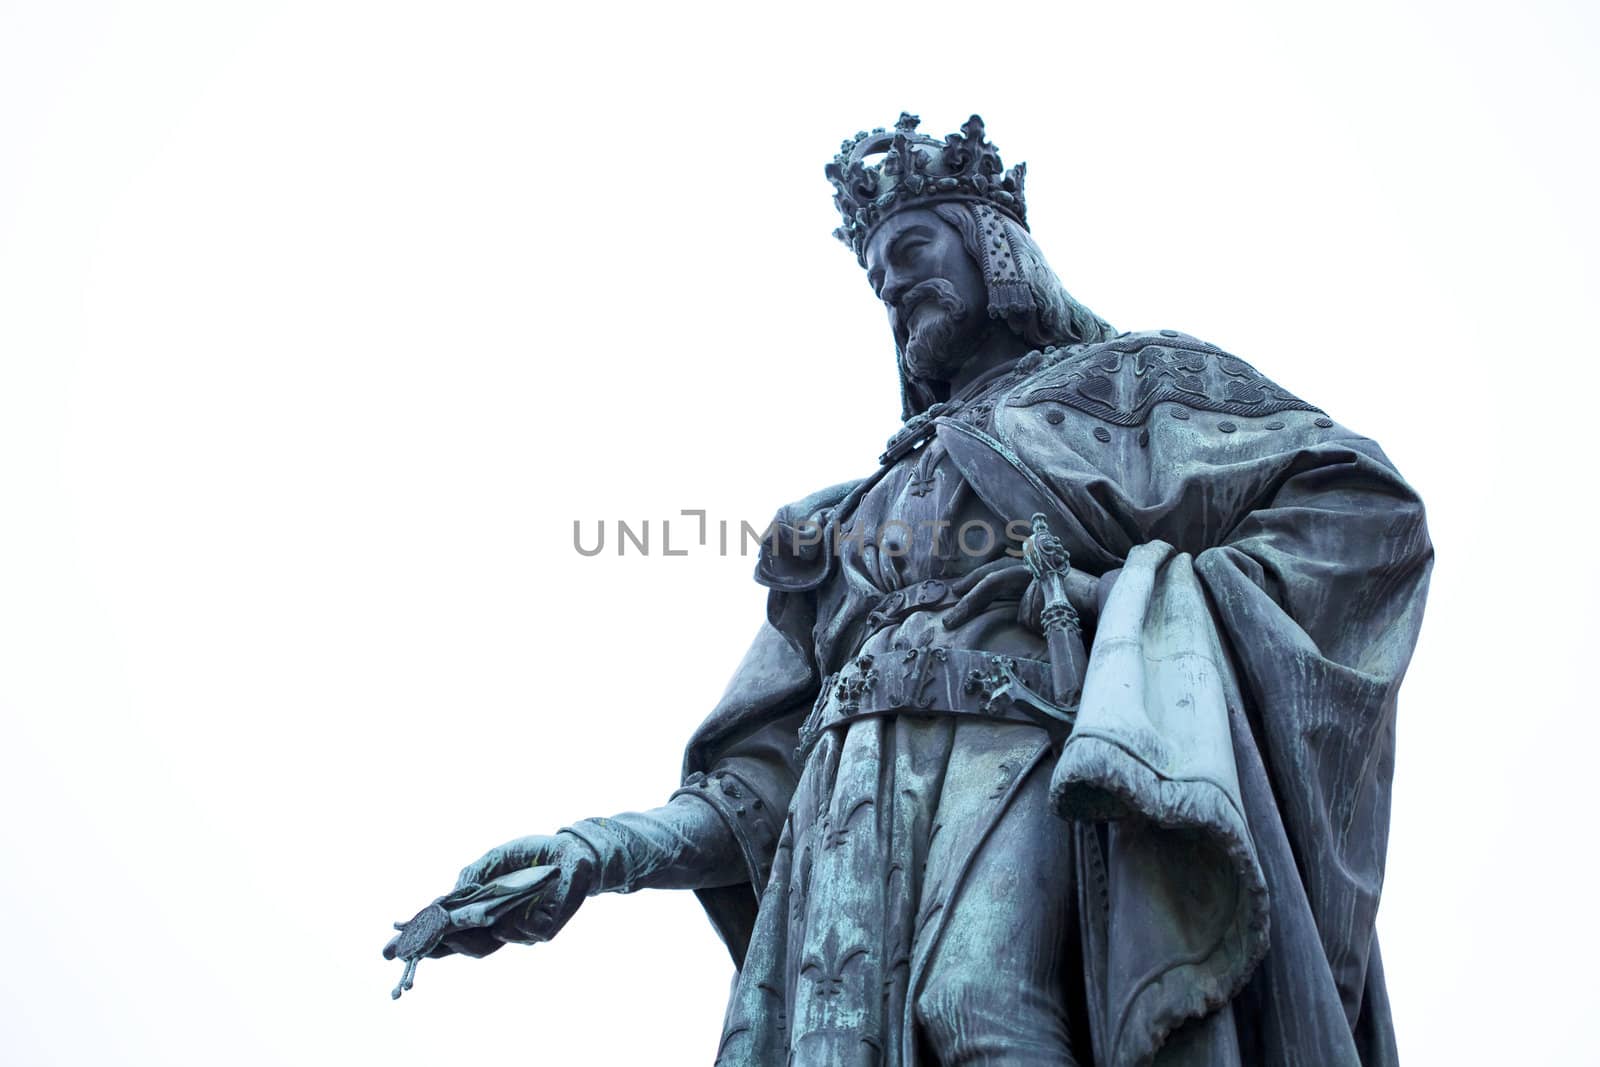 Statue of King Charles in Prague by jannyjus